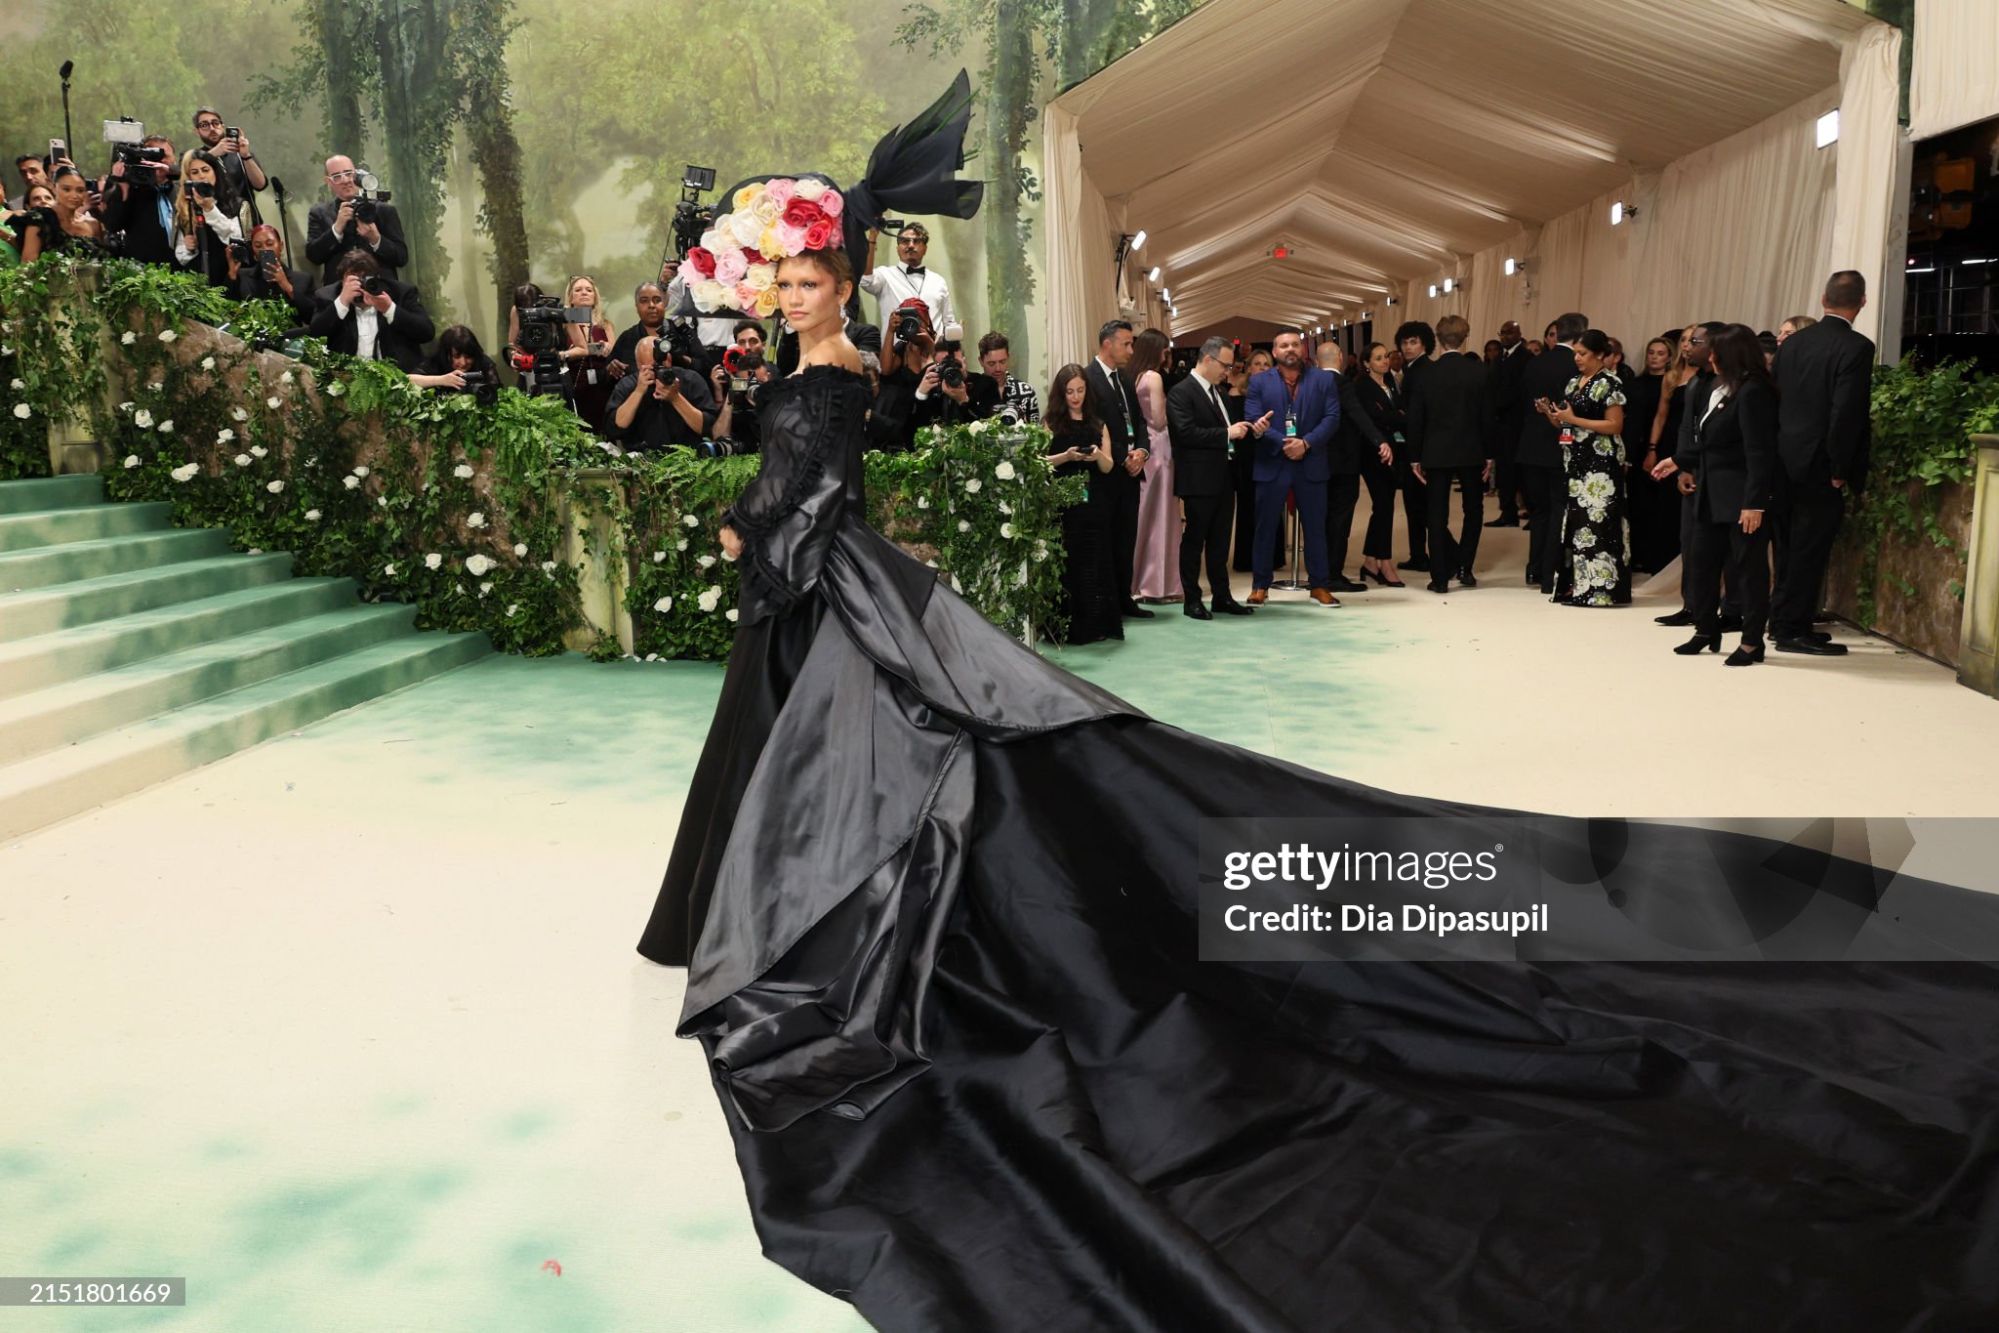 gettyimages-2151801669-2048x2048.jpg